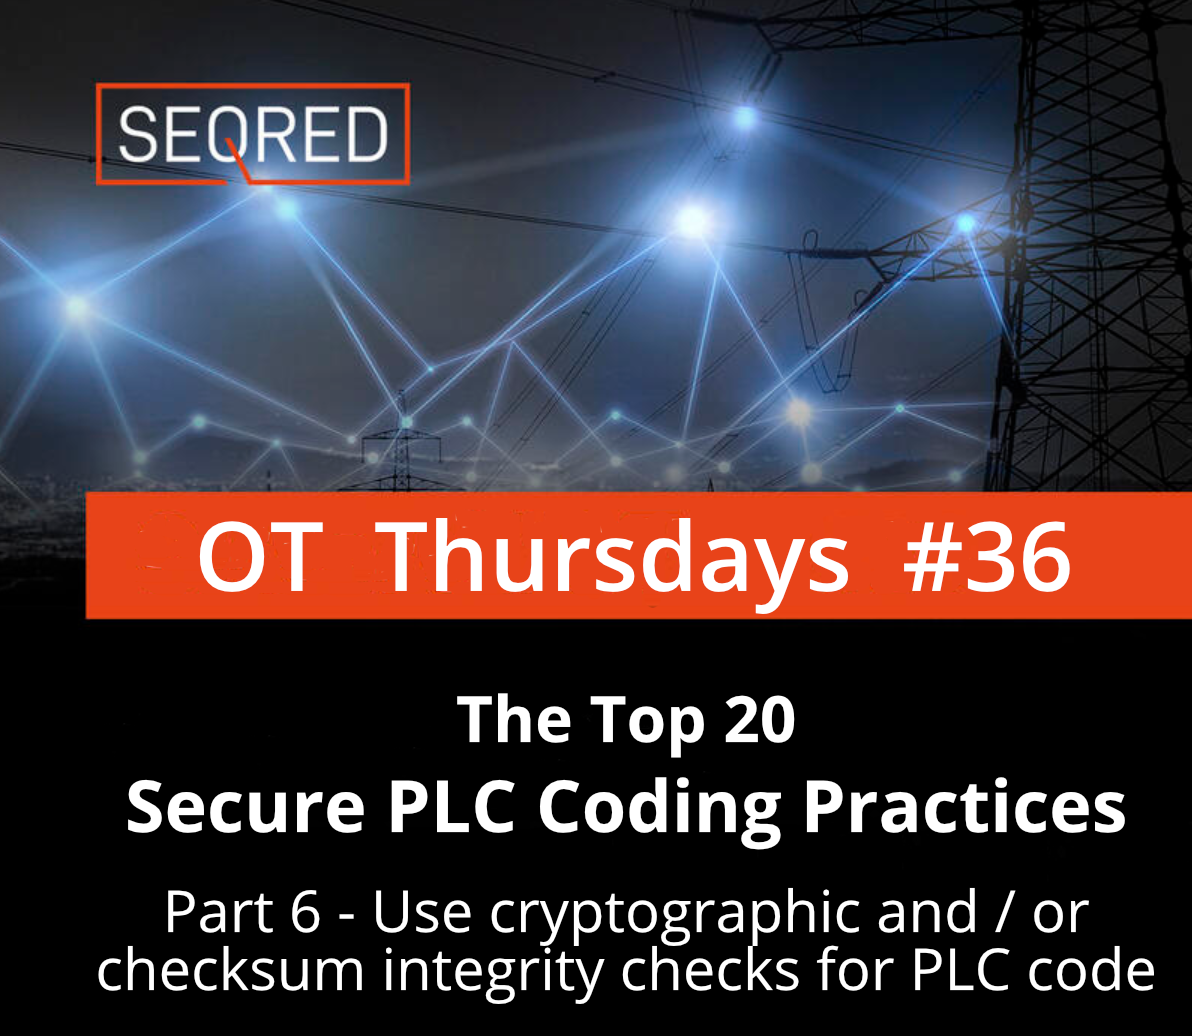 The Top 20 Secure PLC Coding Practices. Part 6 - Use cryptographic and / or checksum integrity checks for PLC code